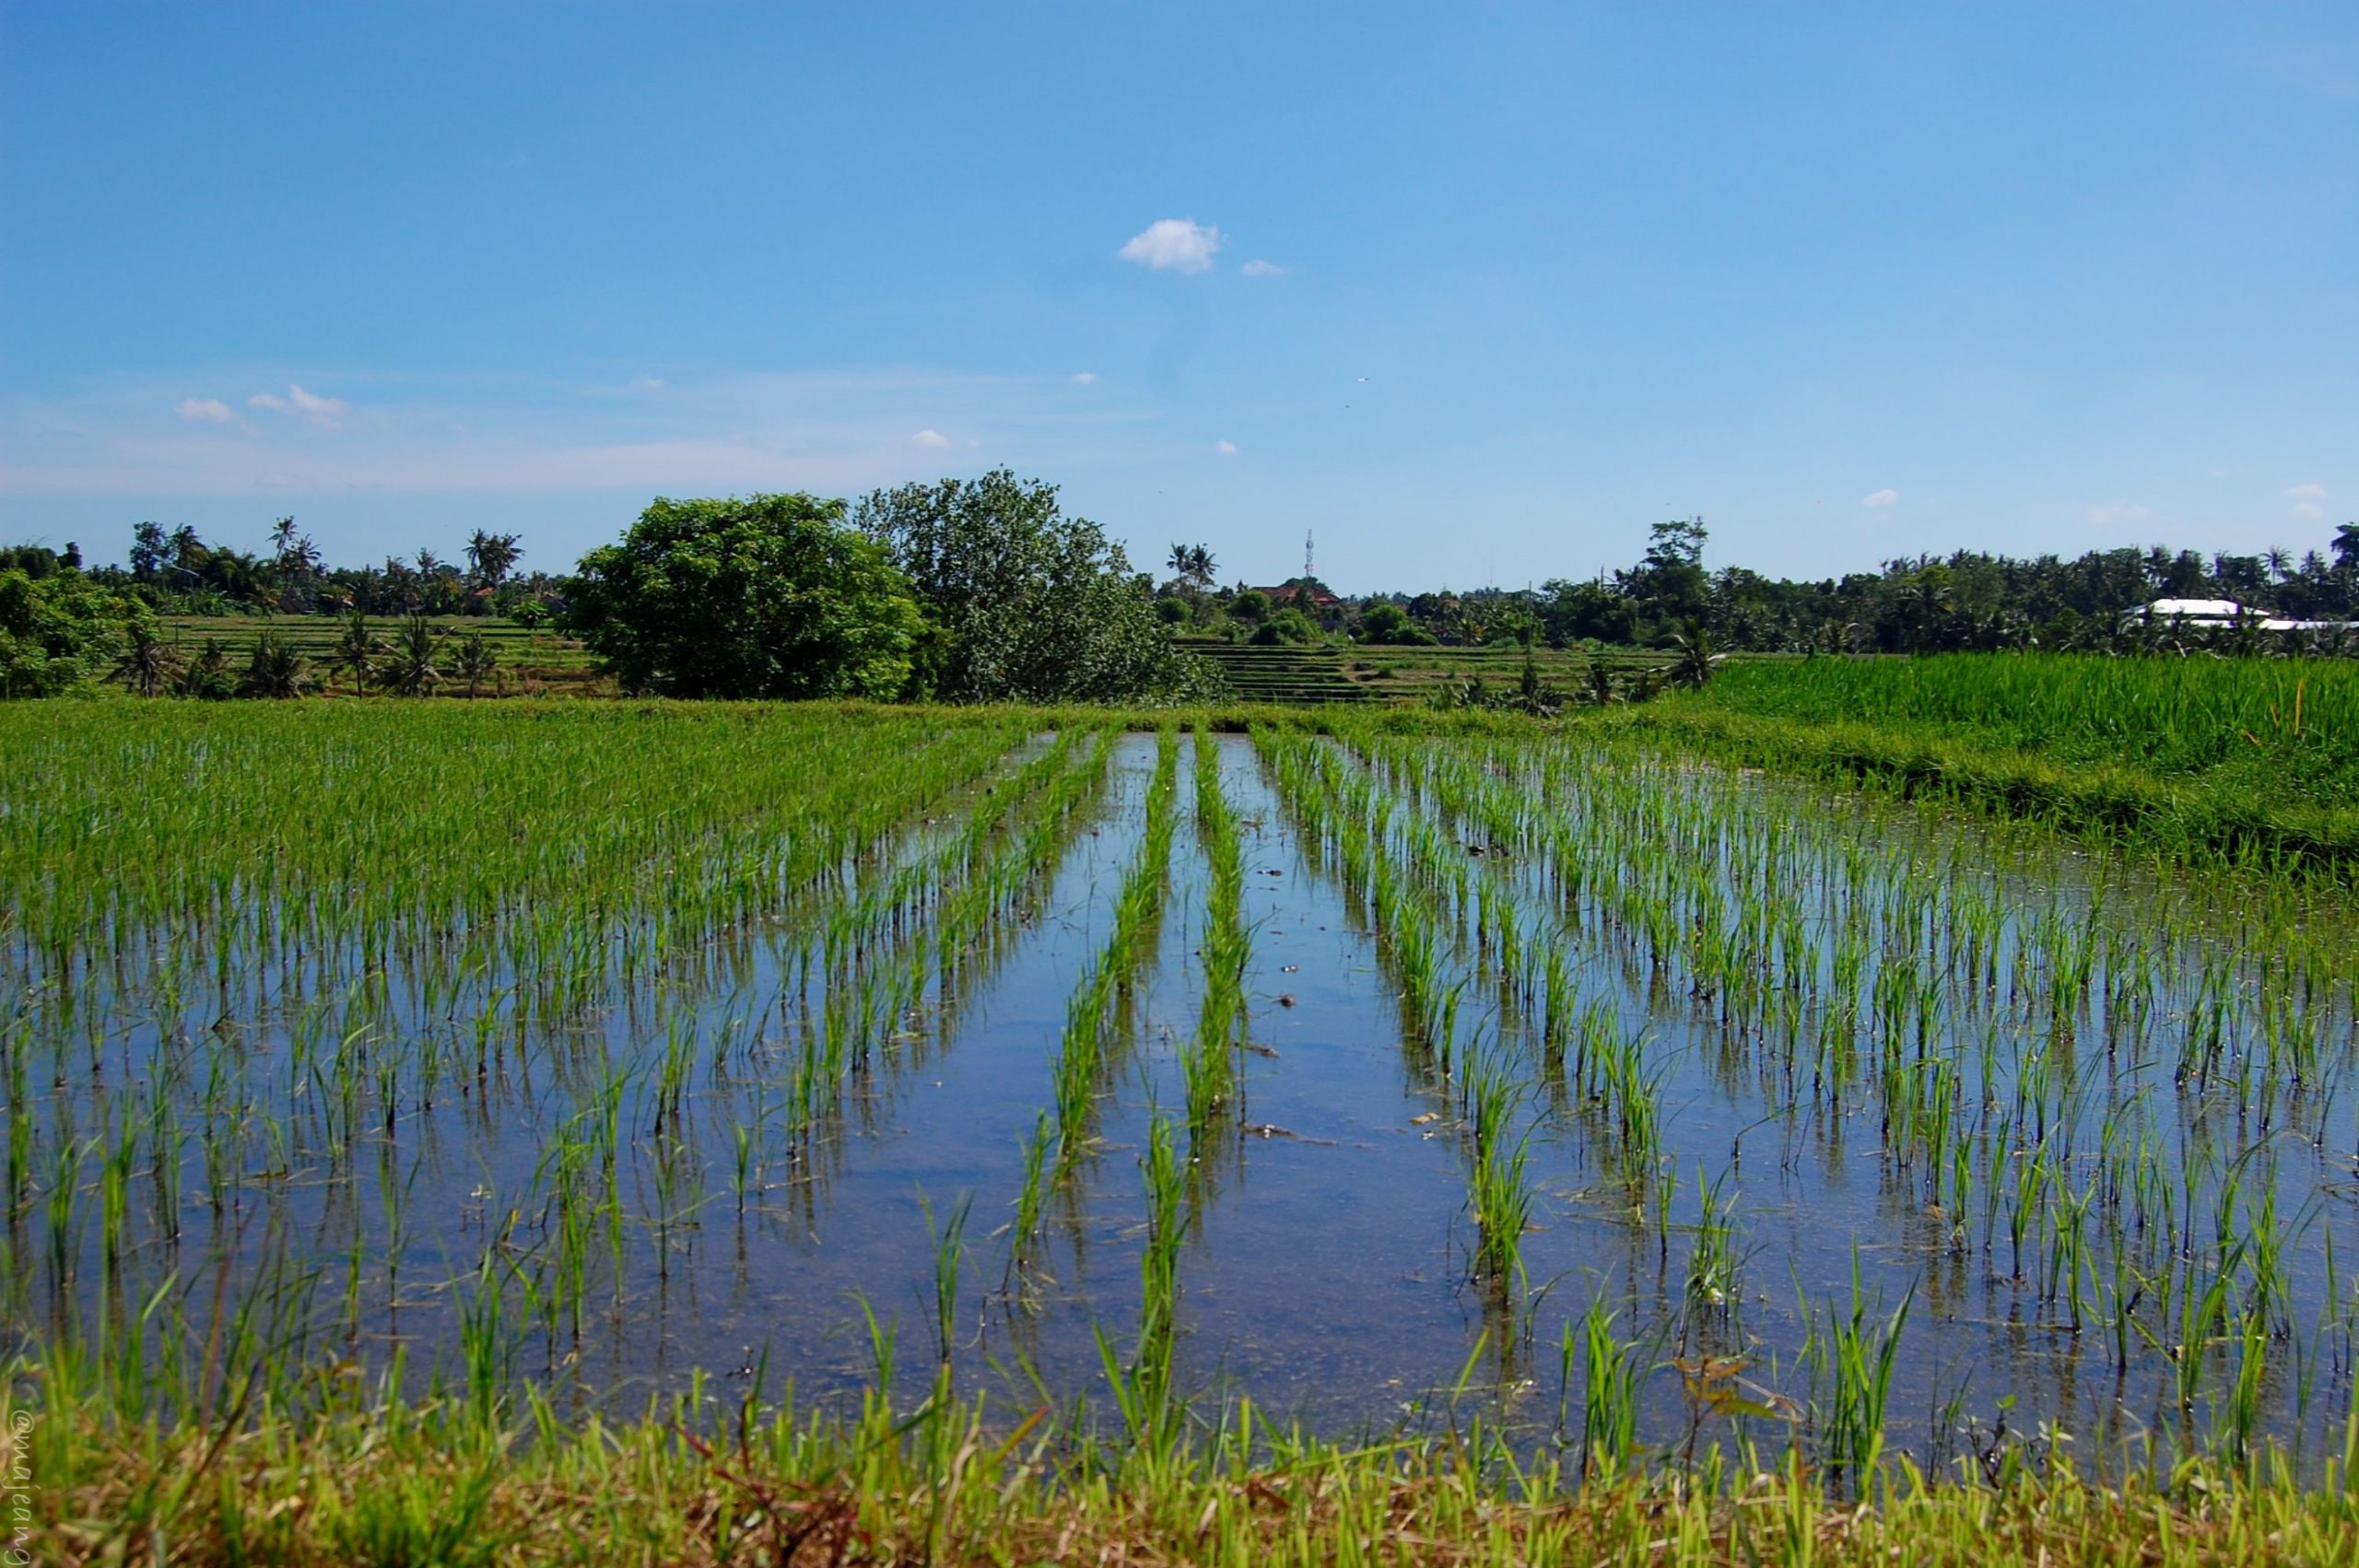 5 things no one tells you about travel - Bali rice field